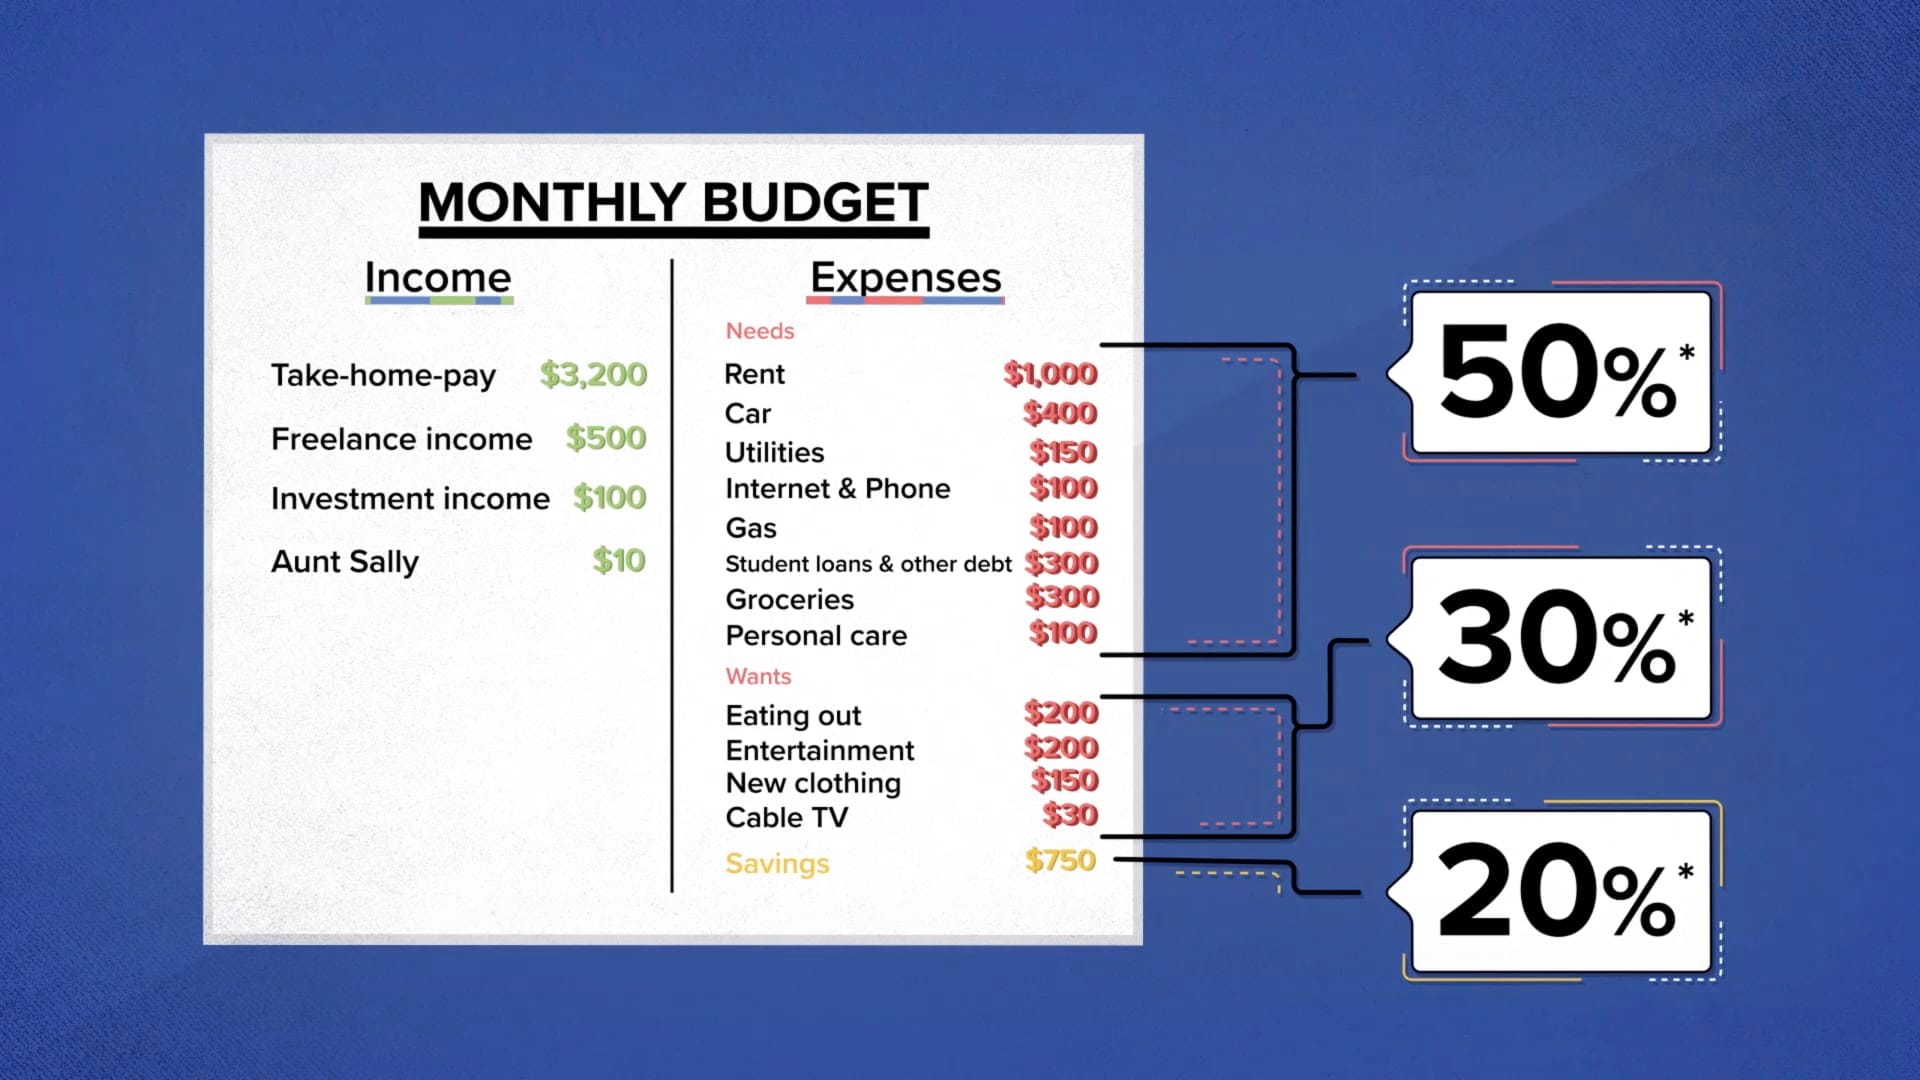 Budget Planner: A Guide to Managing Your Finances